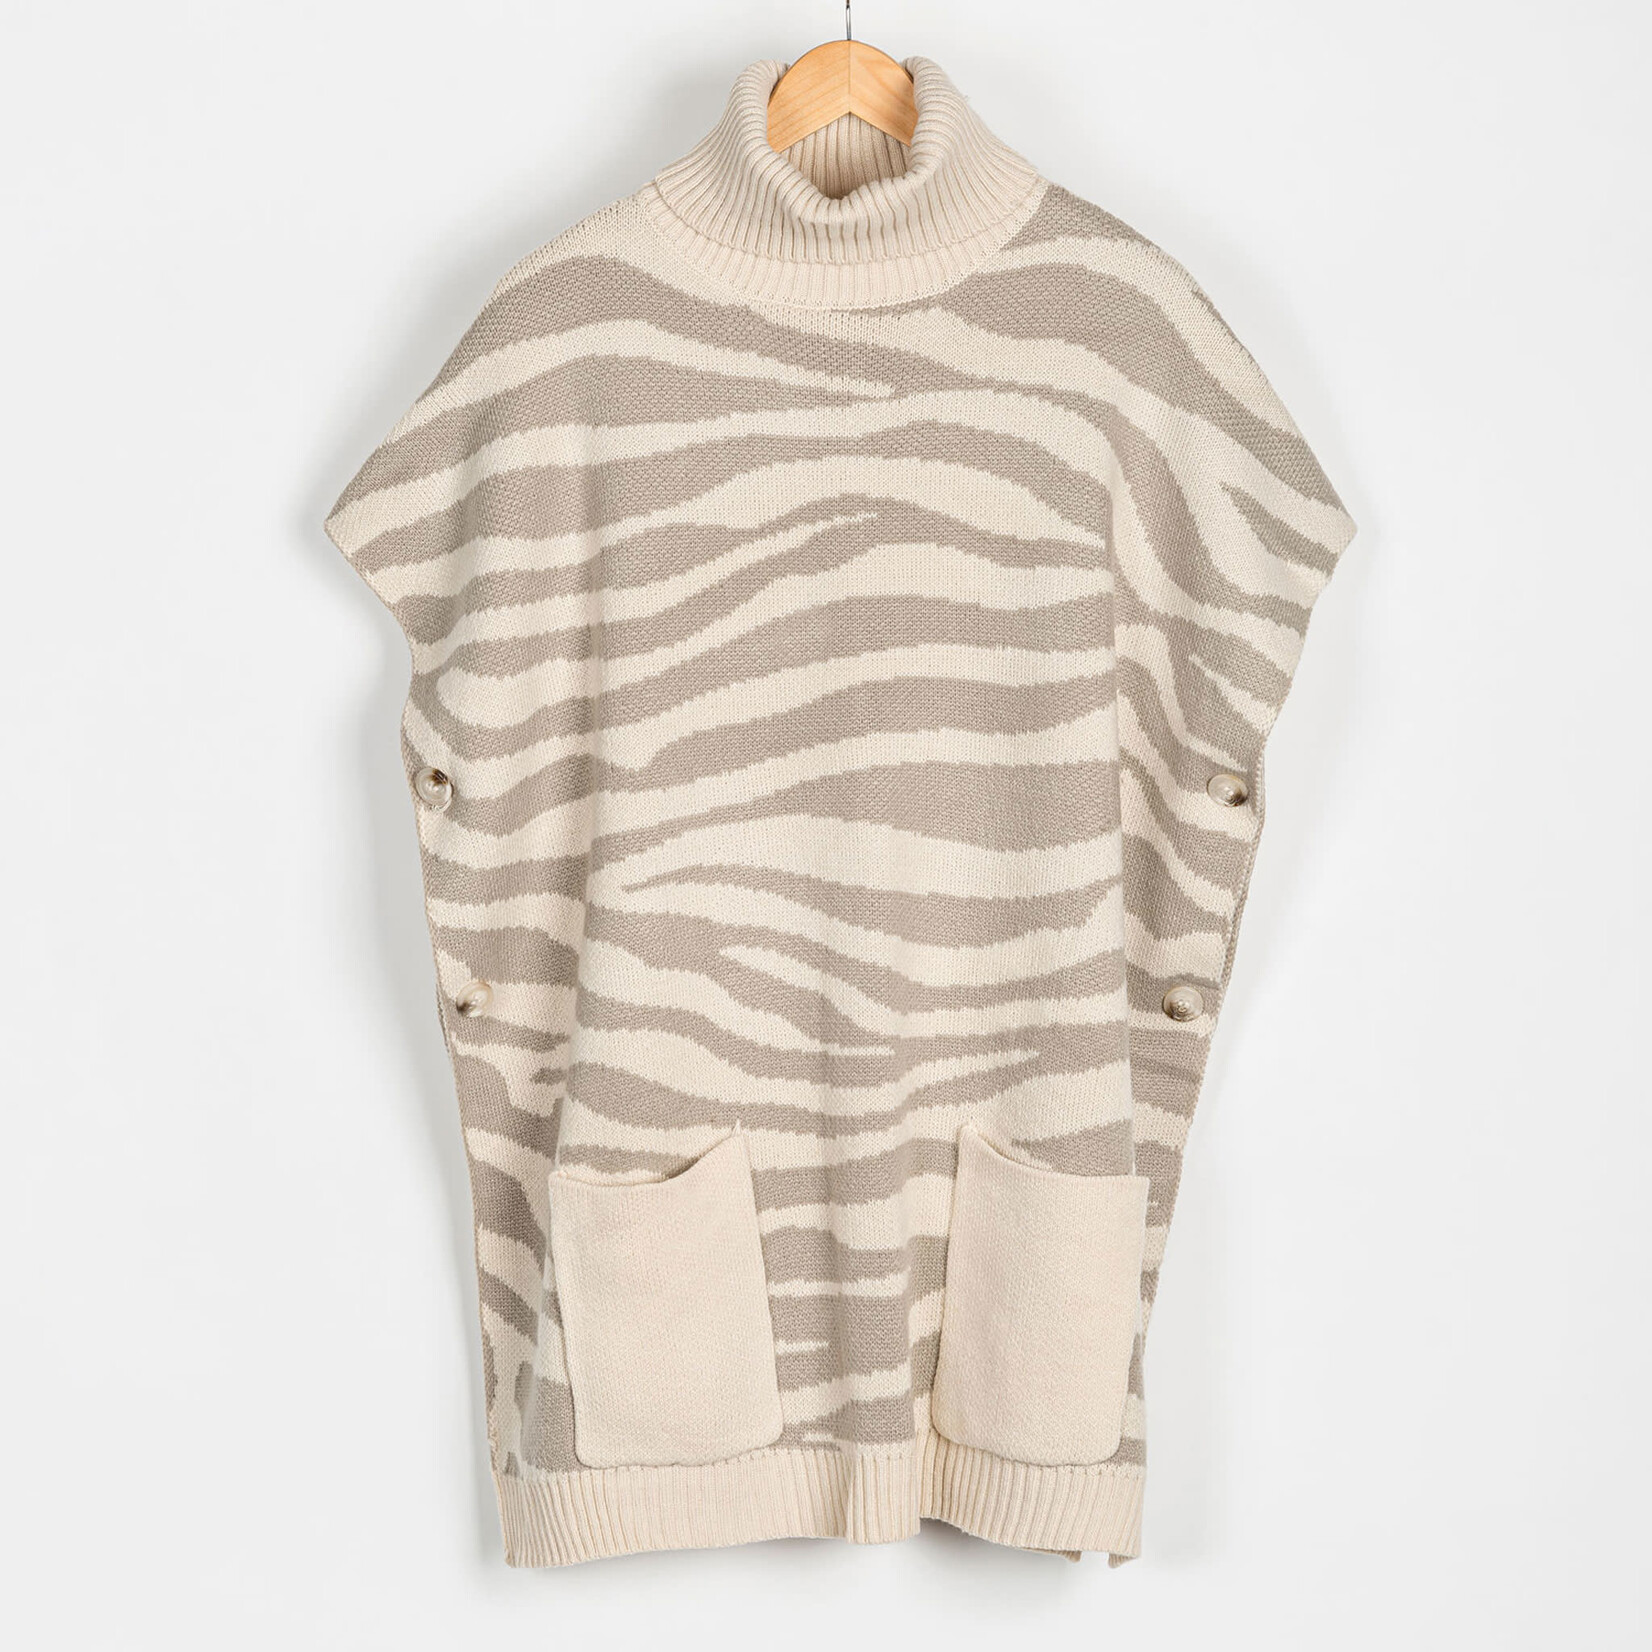 Howards Howard's Cream Tiger Turtleneck Poncho with Patch Pockets 25245